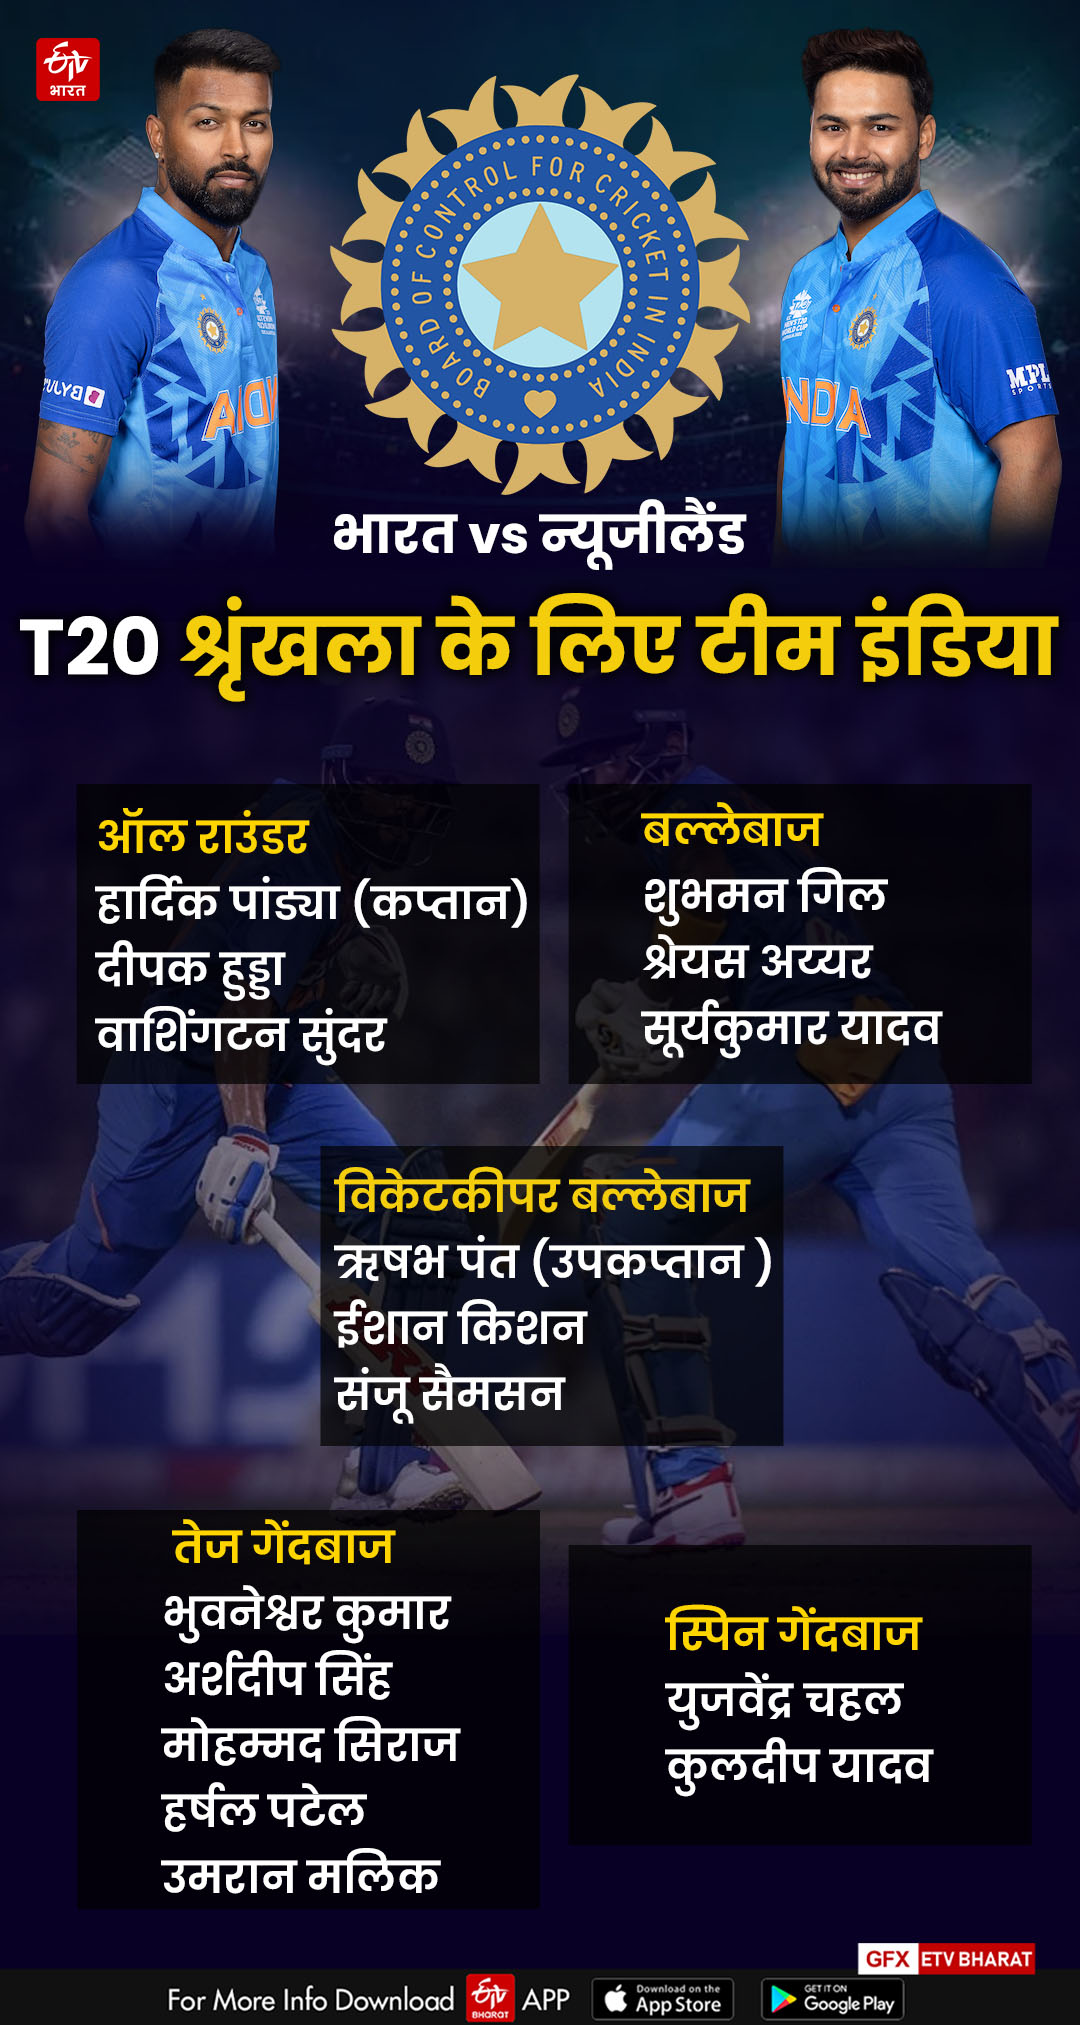 Team India For T20 Matches in New Zealand